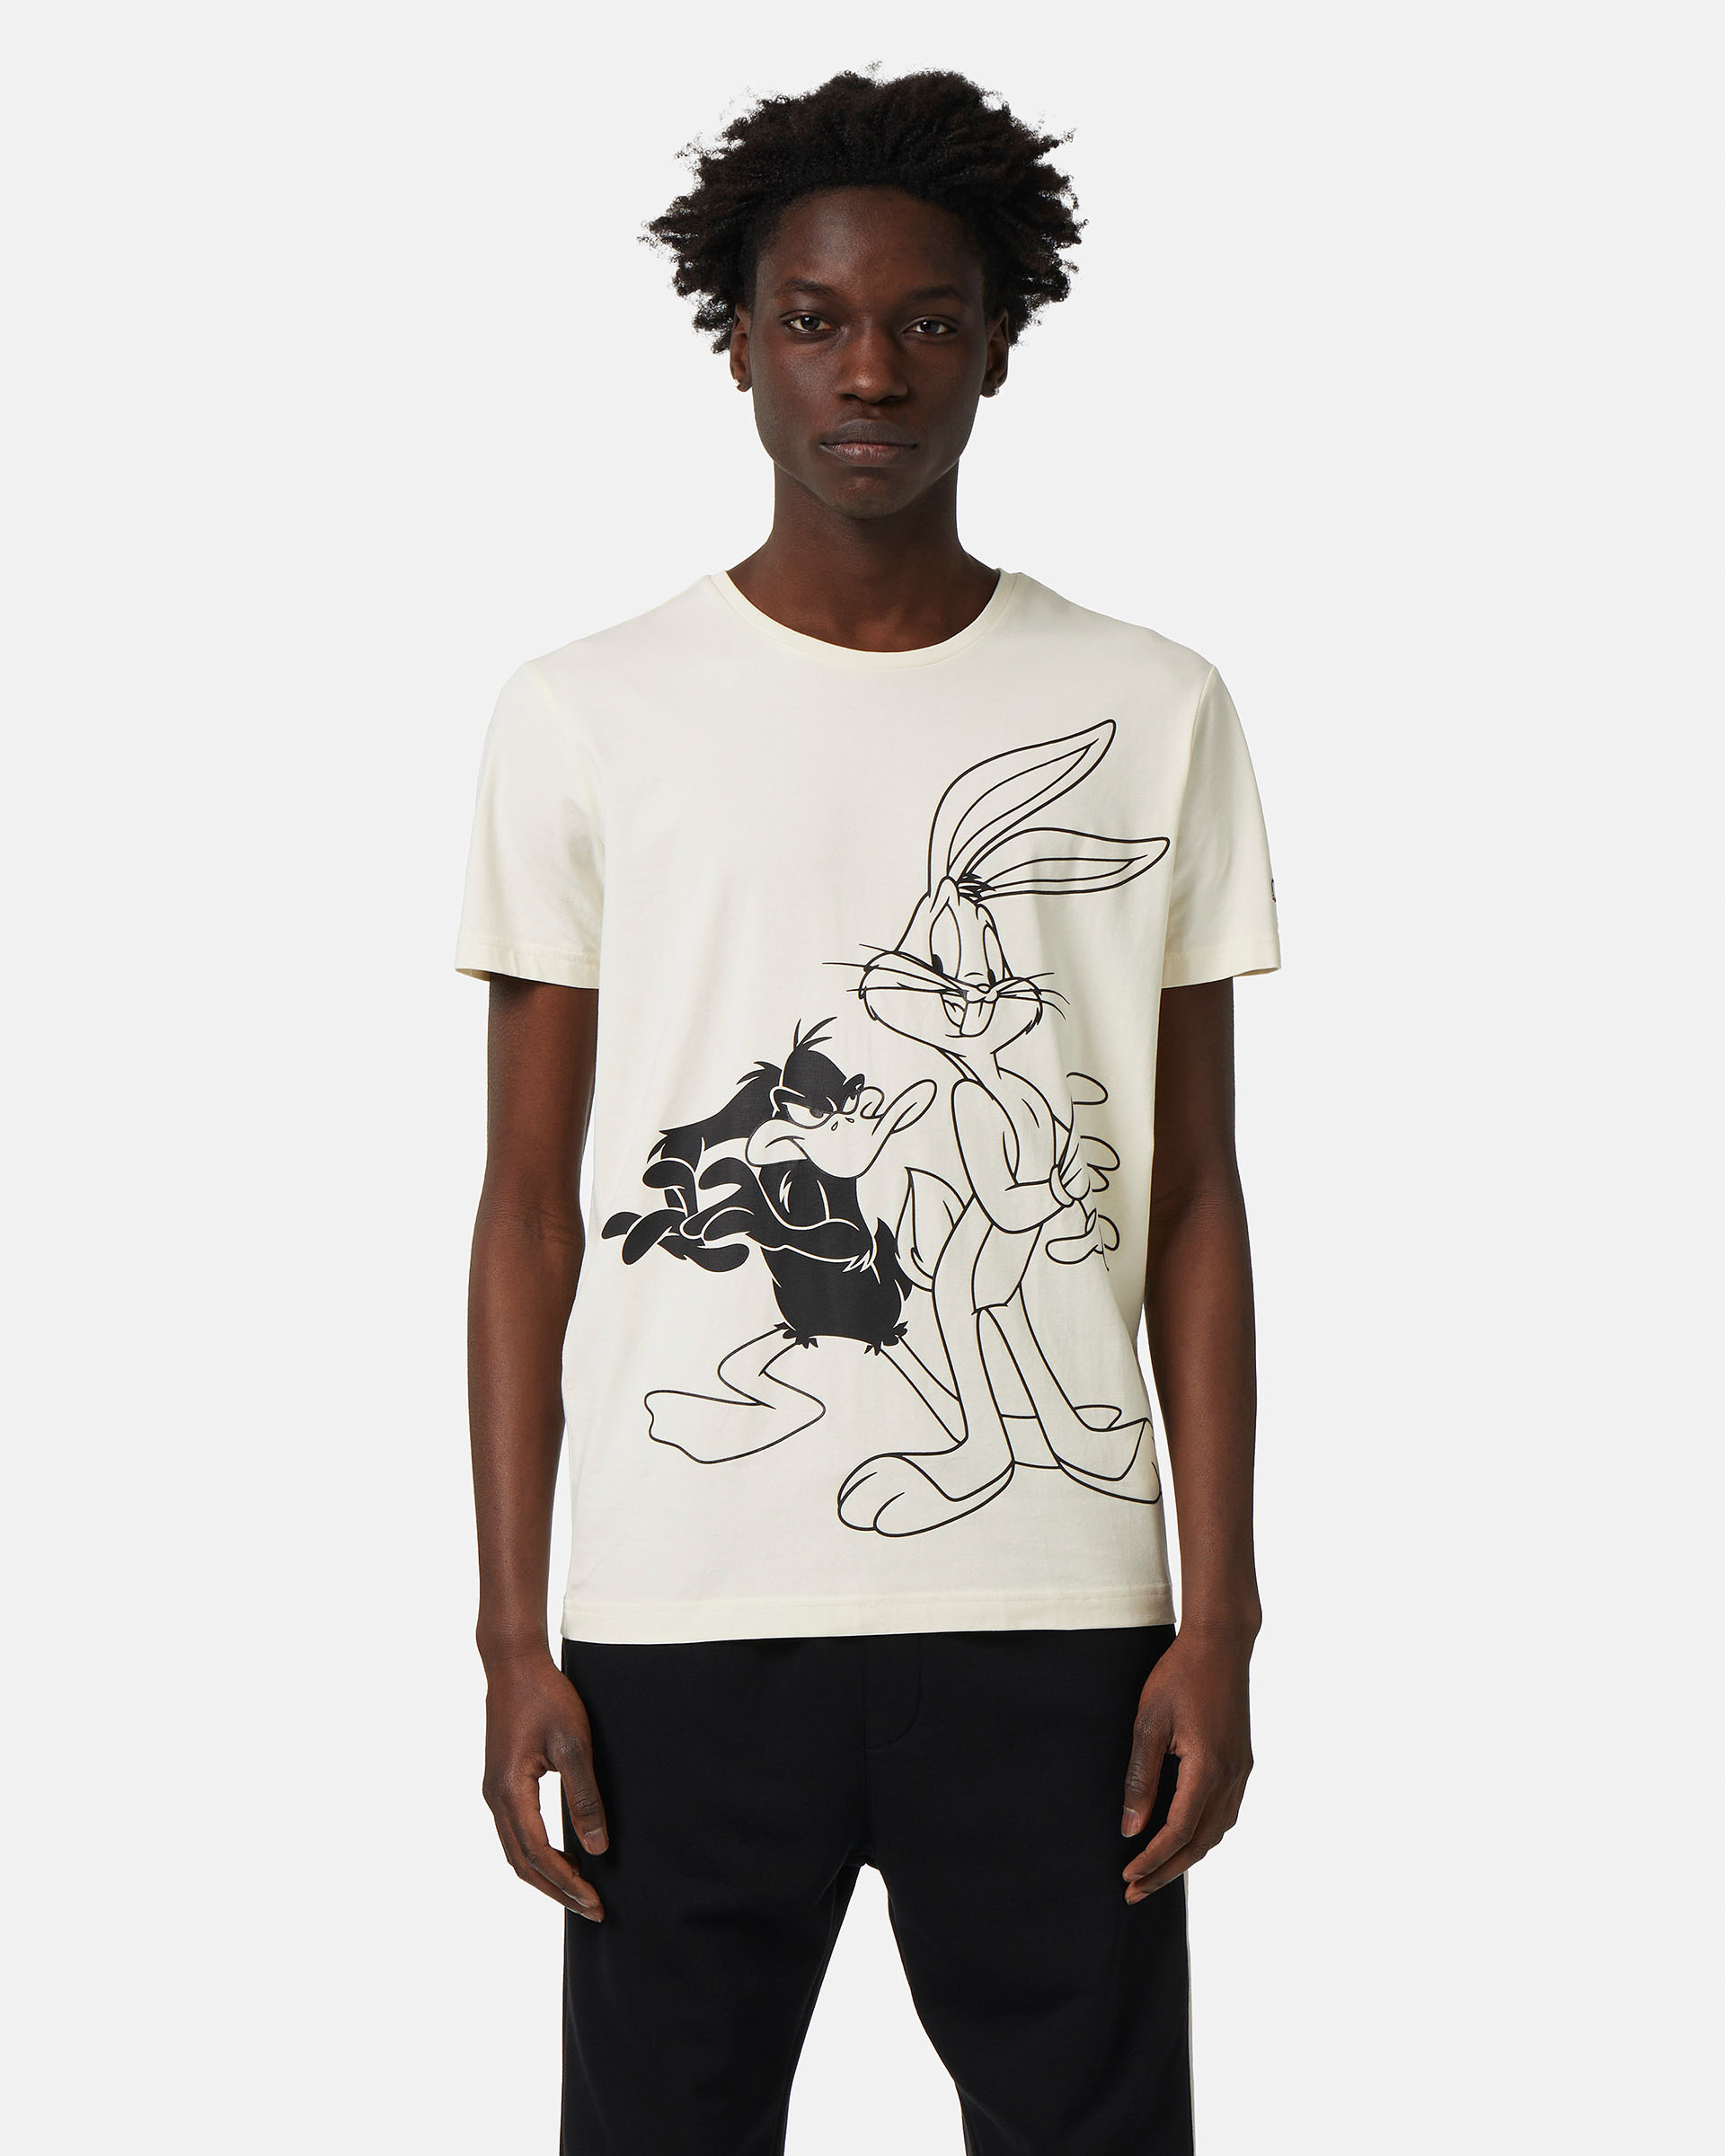 Dangle Arving Manners Bugs Bunny and Daffy Duck t-shirt in cream | Iceberg